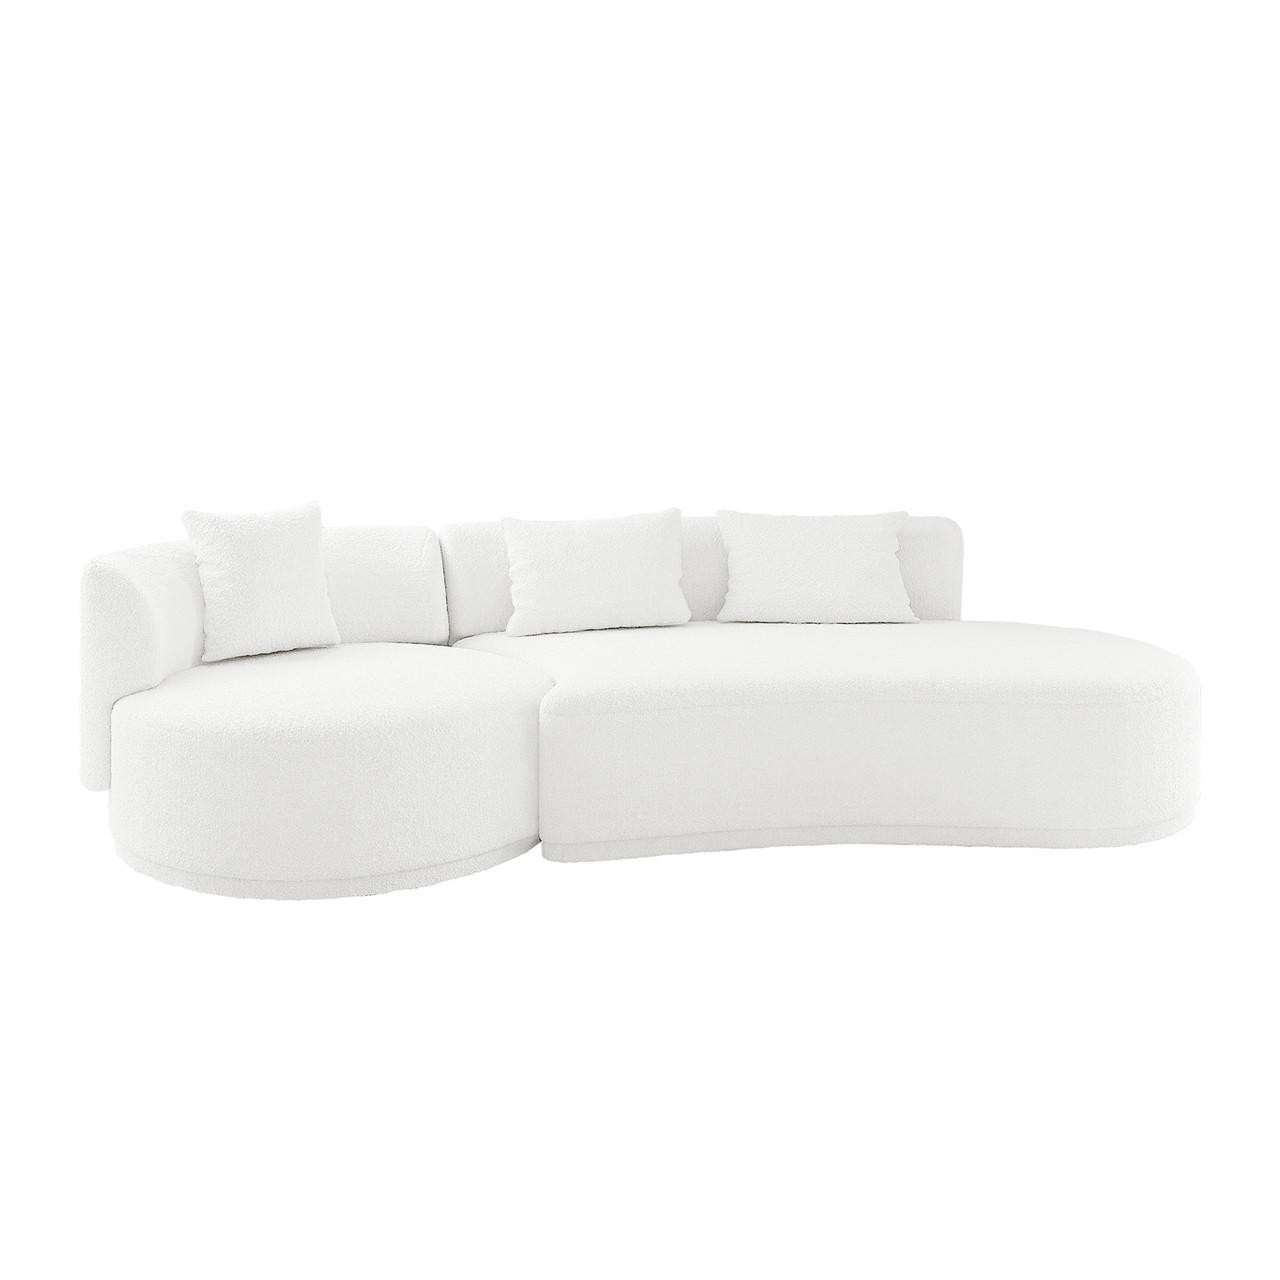 Lyana 4 Seater Boucle Sofa With Right Chaise - Cream White